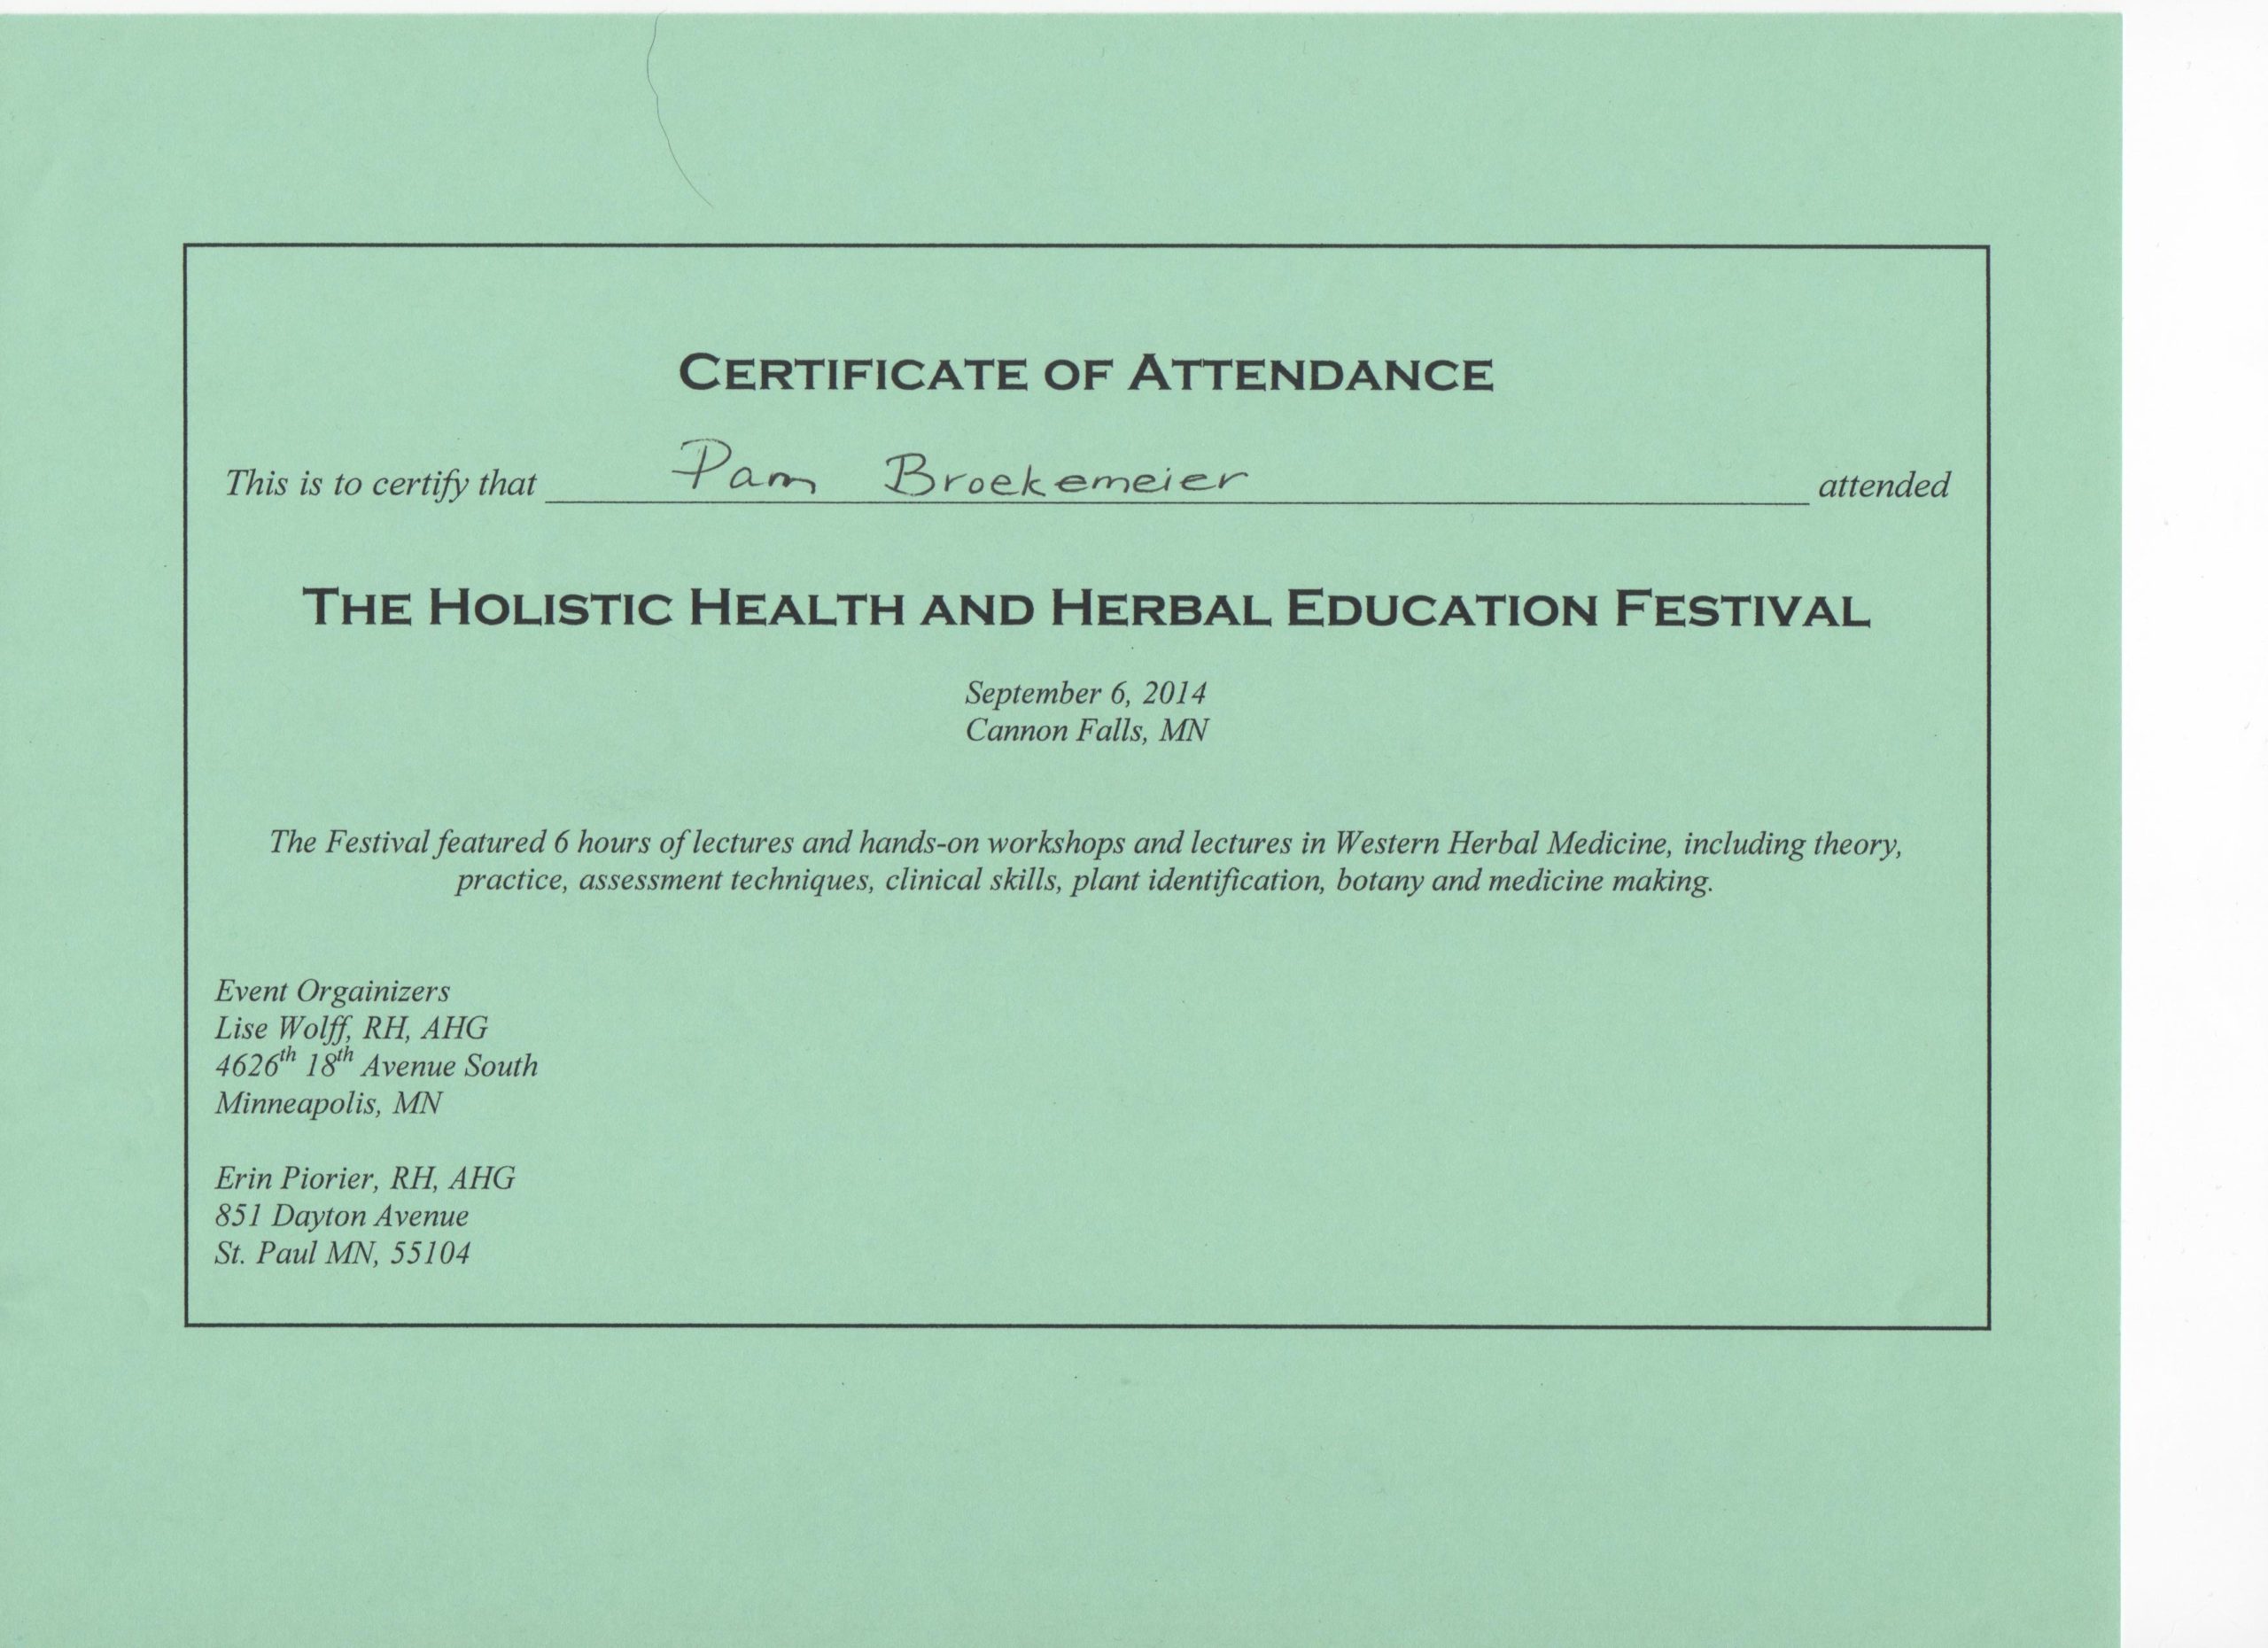 Attended the Holistic Health and Herbal Education Festival on Sept. 6, 2014